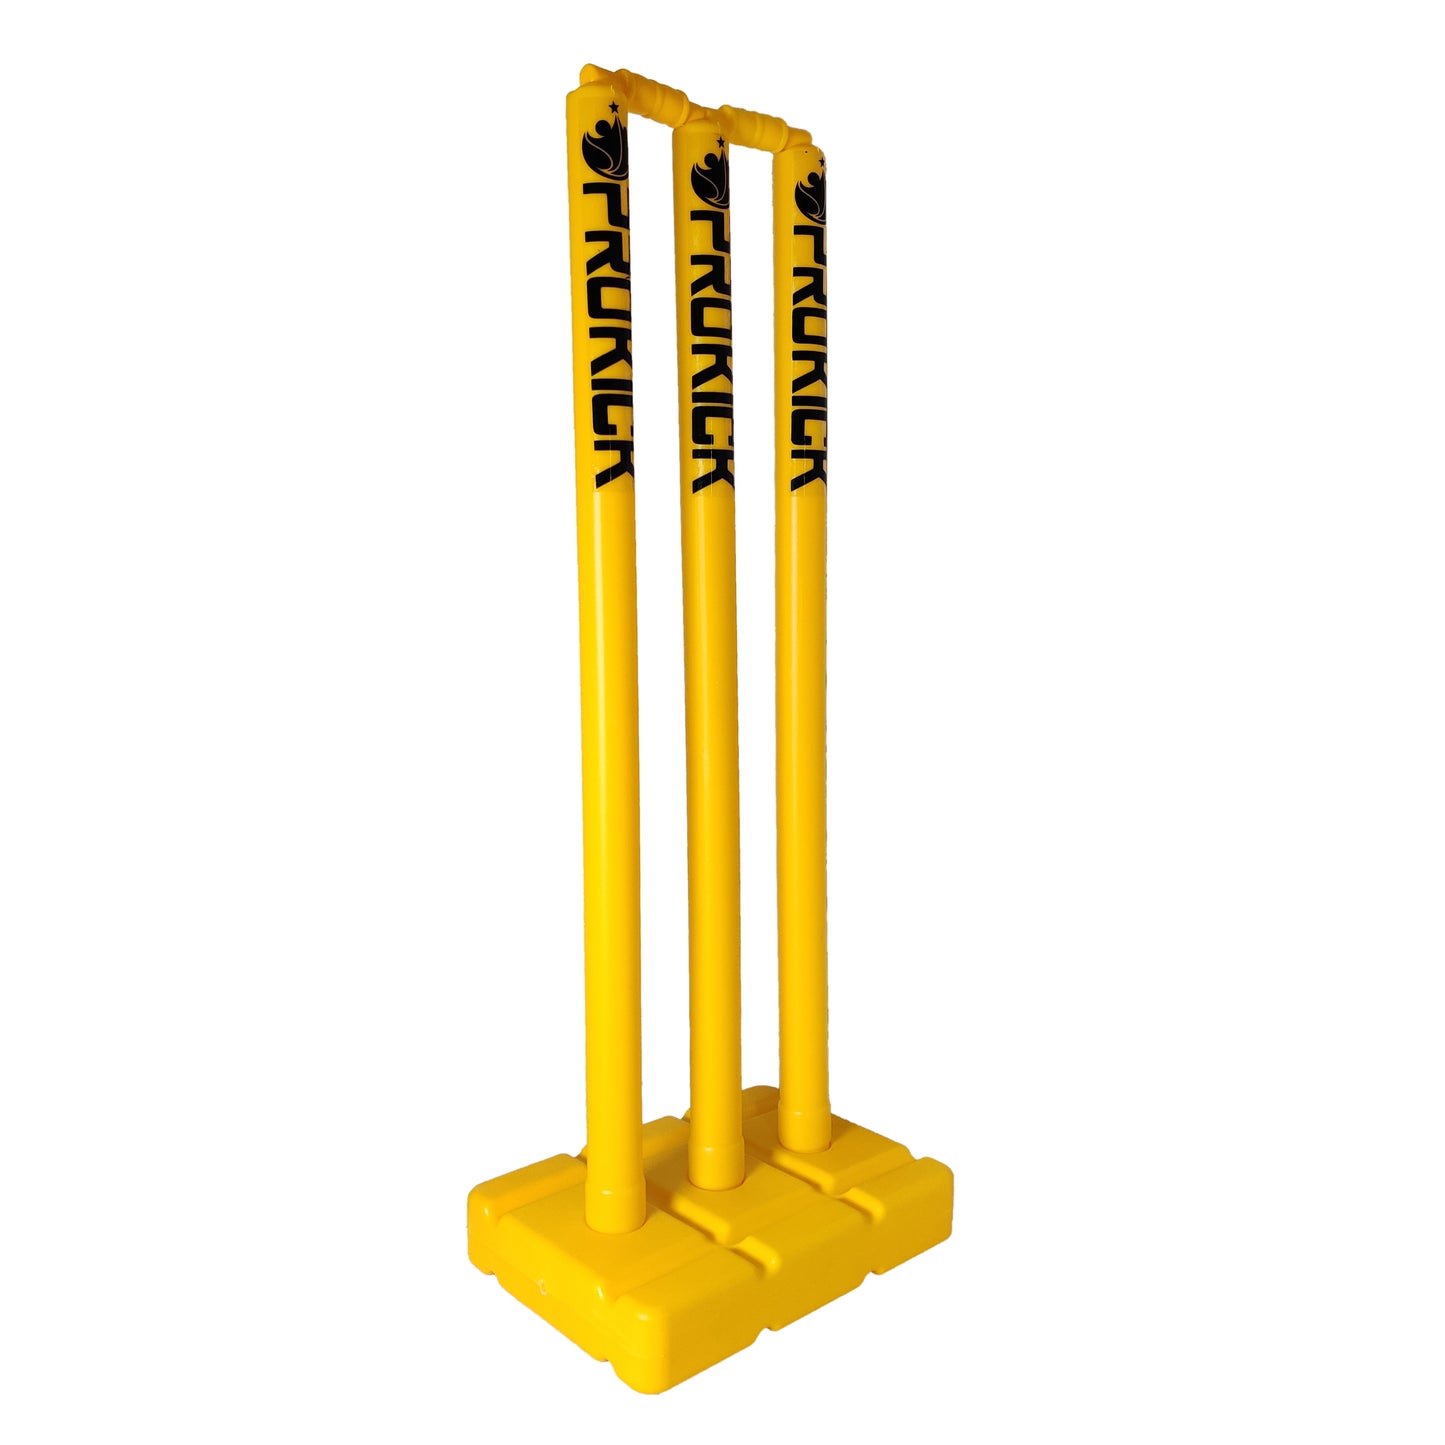 Prokick Plastic Cricket kit for All Age Groups and Sizes - Best Price online Prokicksports.com